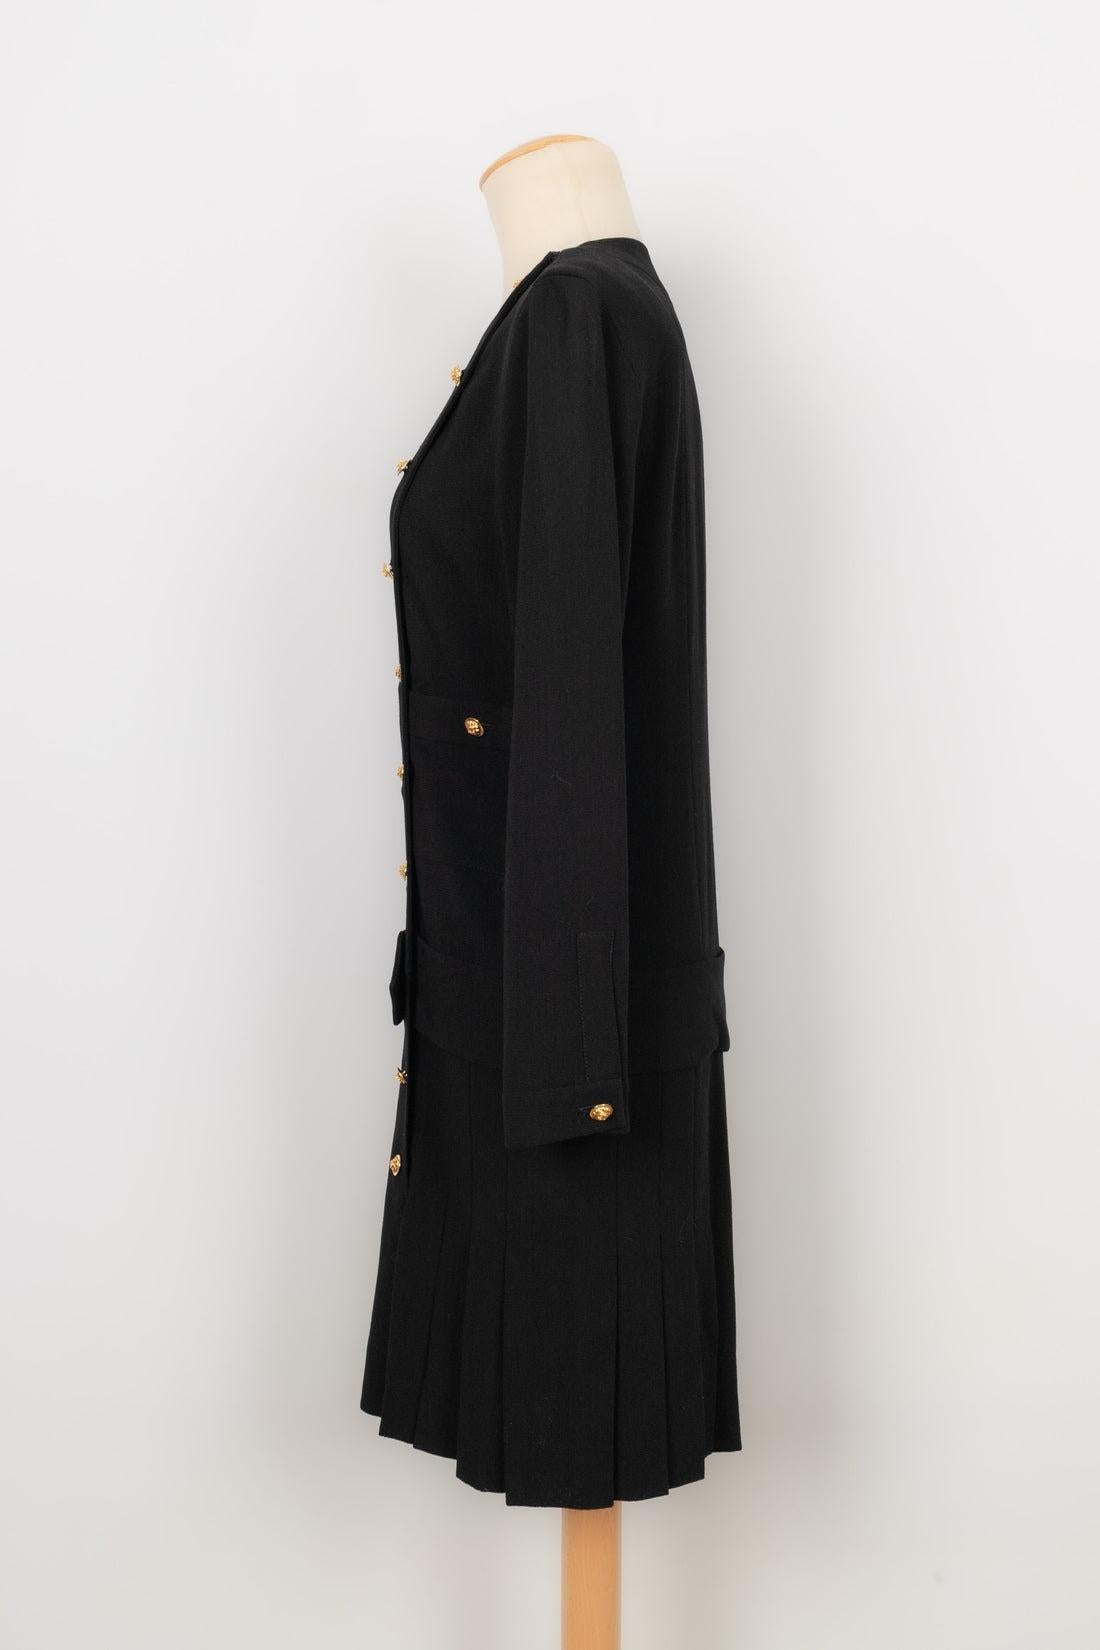 Chanel - Long-sleeved black dress ornamented with golden metal buttons. No size indicated, it fits a 38FR. Piece from the end of the 1980s.

Additional information:
Condition: Very good condition
Dimensions: Shoulder width: 39 cm - Chest: 48 cm -